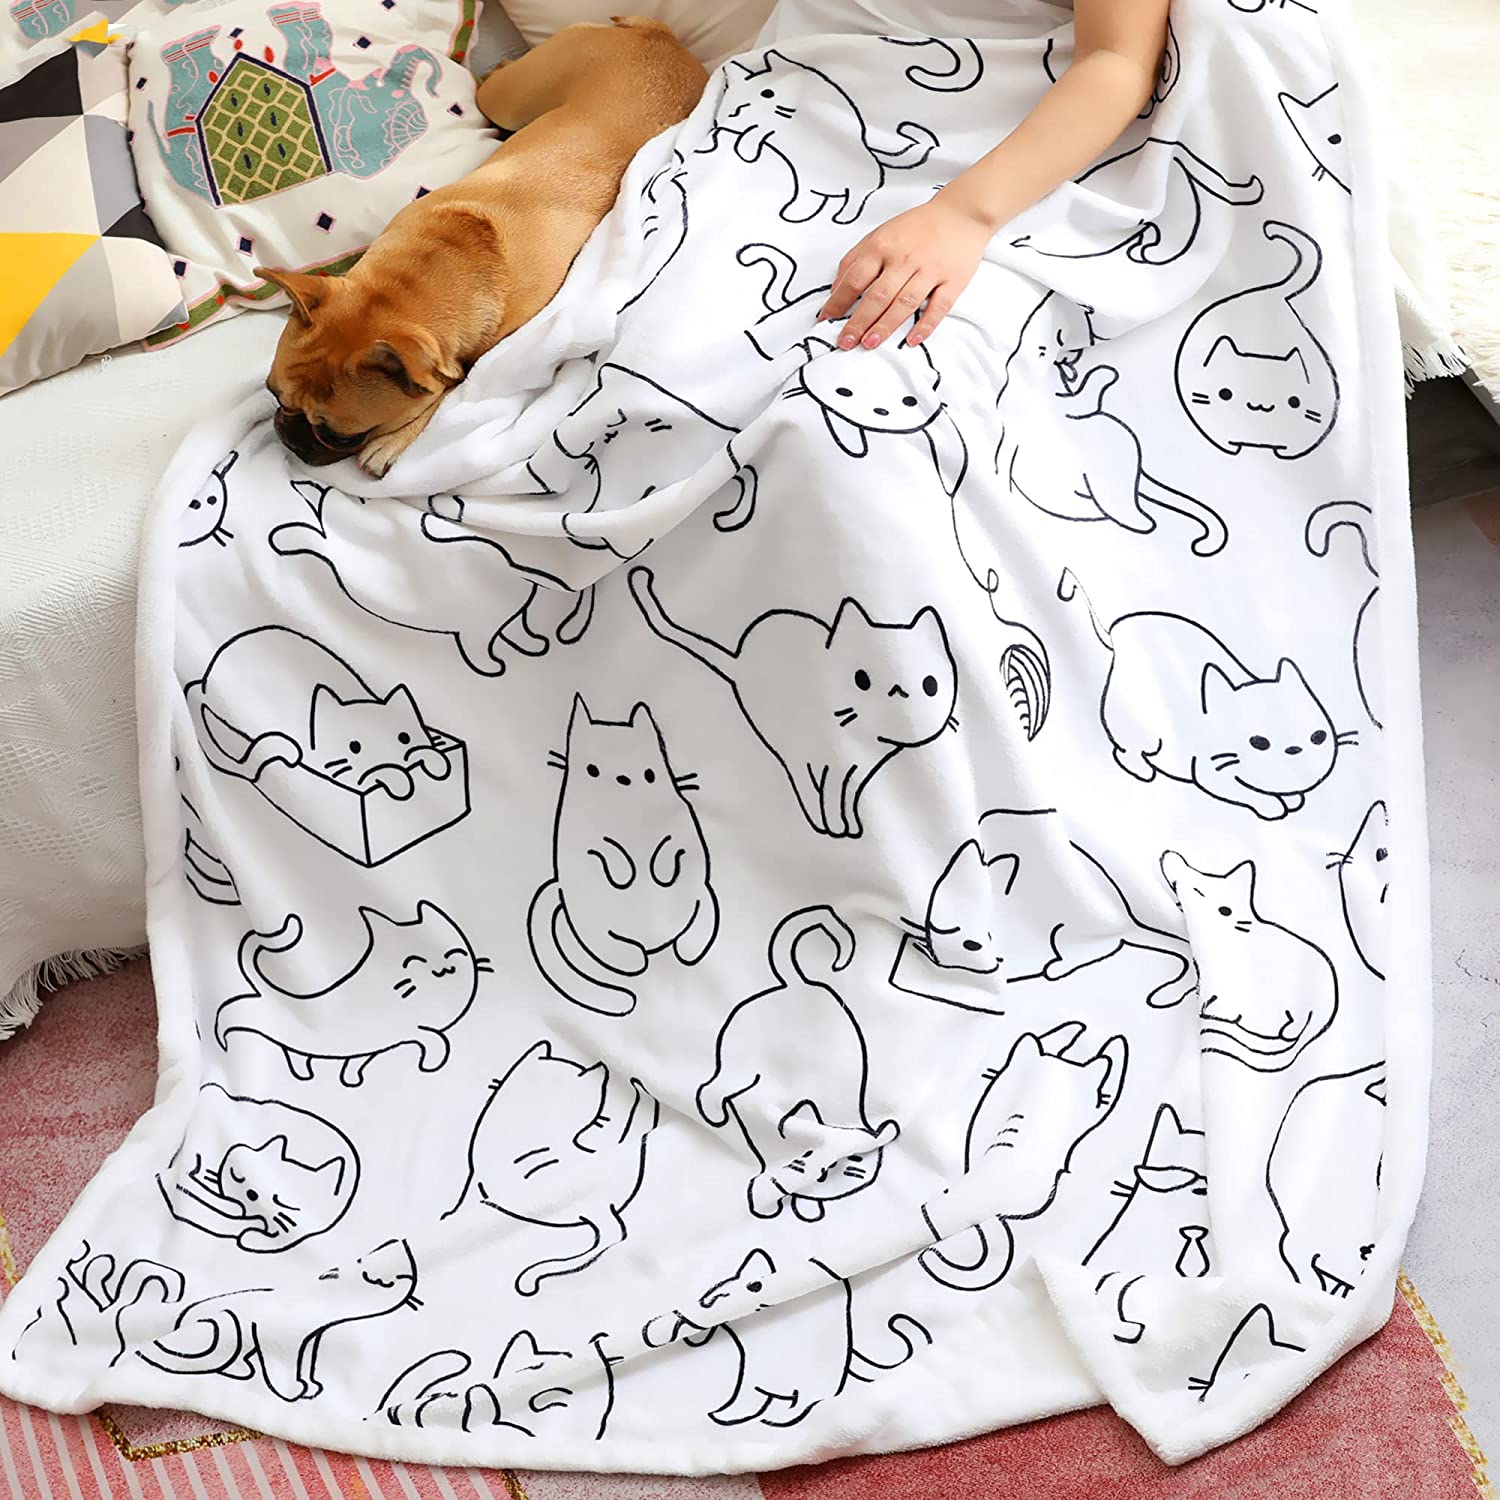 Sviuse Cat Blanket Animals Pet Pattern Throw Blanket Cat Lover Gifts Flannel Soft Warm Cozy Fuzzy 50"x60" Throw for Kids and Adults